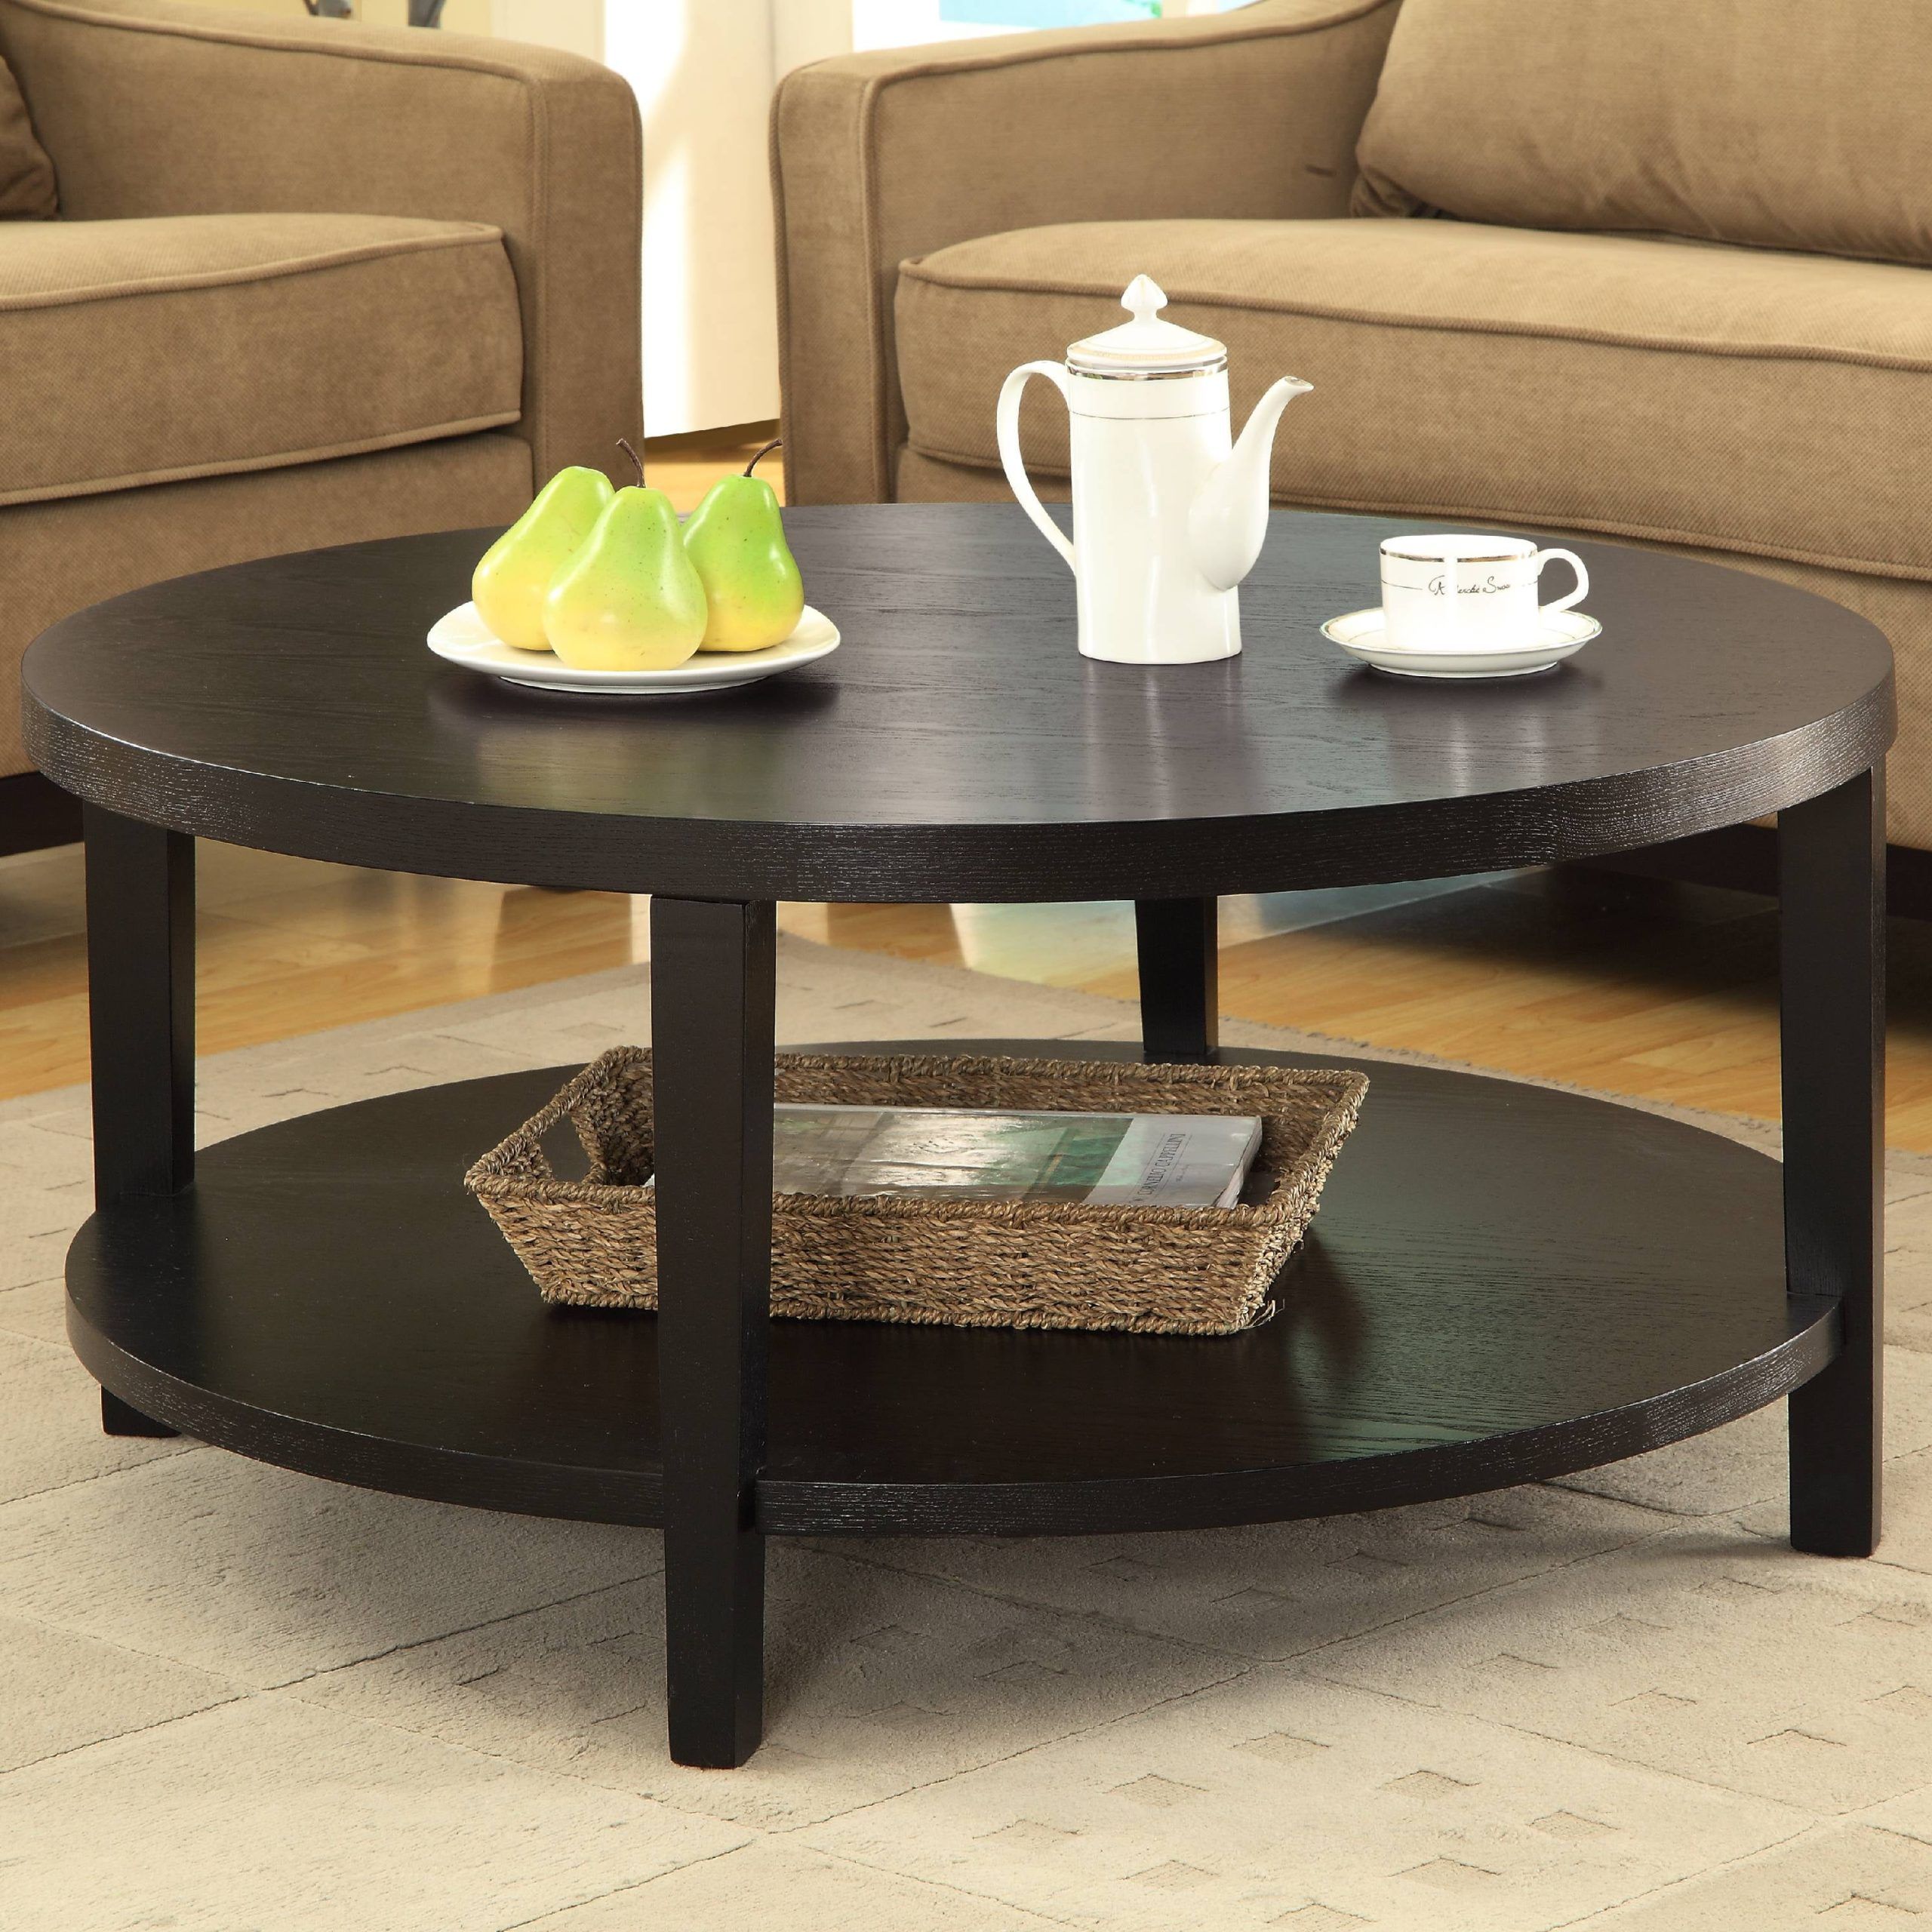 Espresso Round Coffee Table – Southern Enterprises Voyager Espresso With Regard To Round Coffee Tables (View 16 of 20)